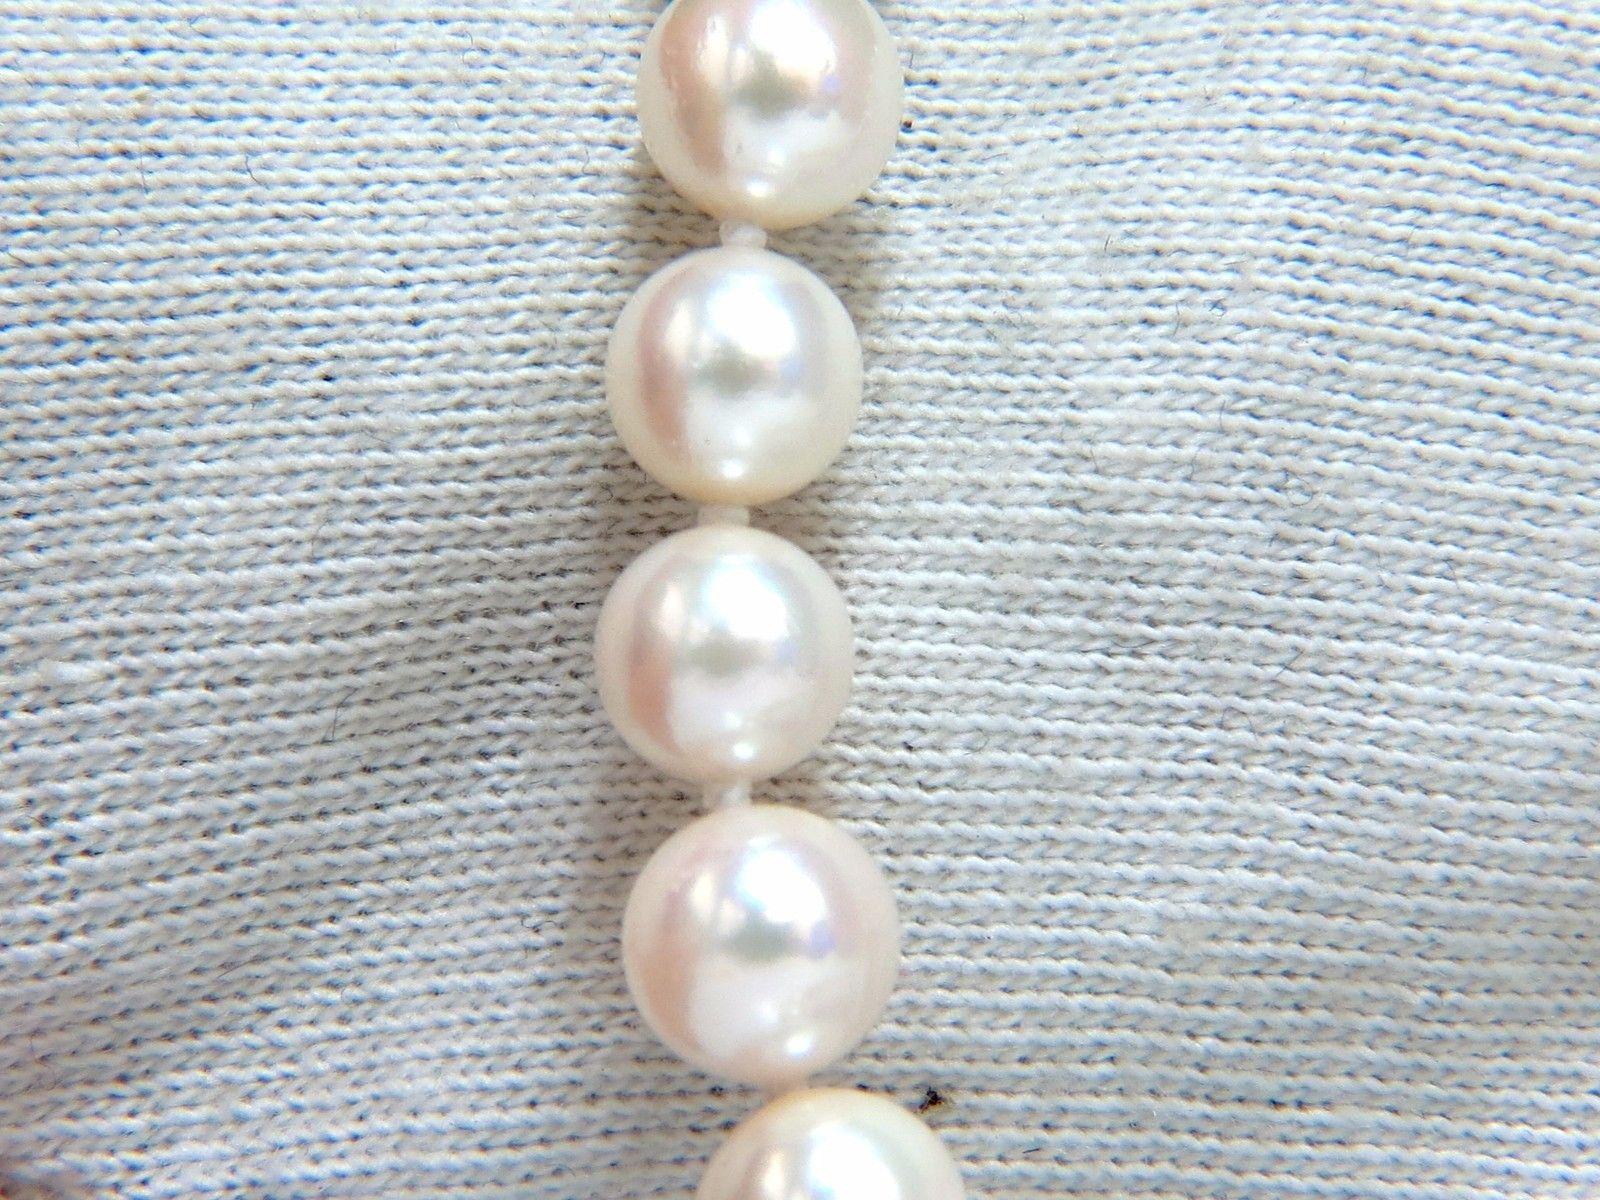 7.3mm Natural Japanese Pearls Necklace

AAA Quality

Endless necklace / can be worn as double wrap

Necklace: 34 inch long.